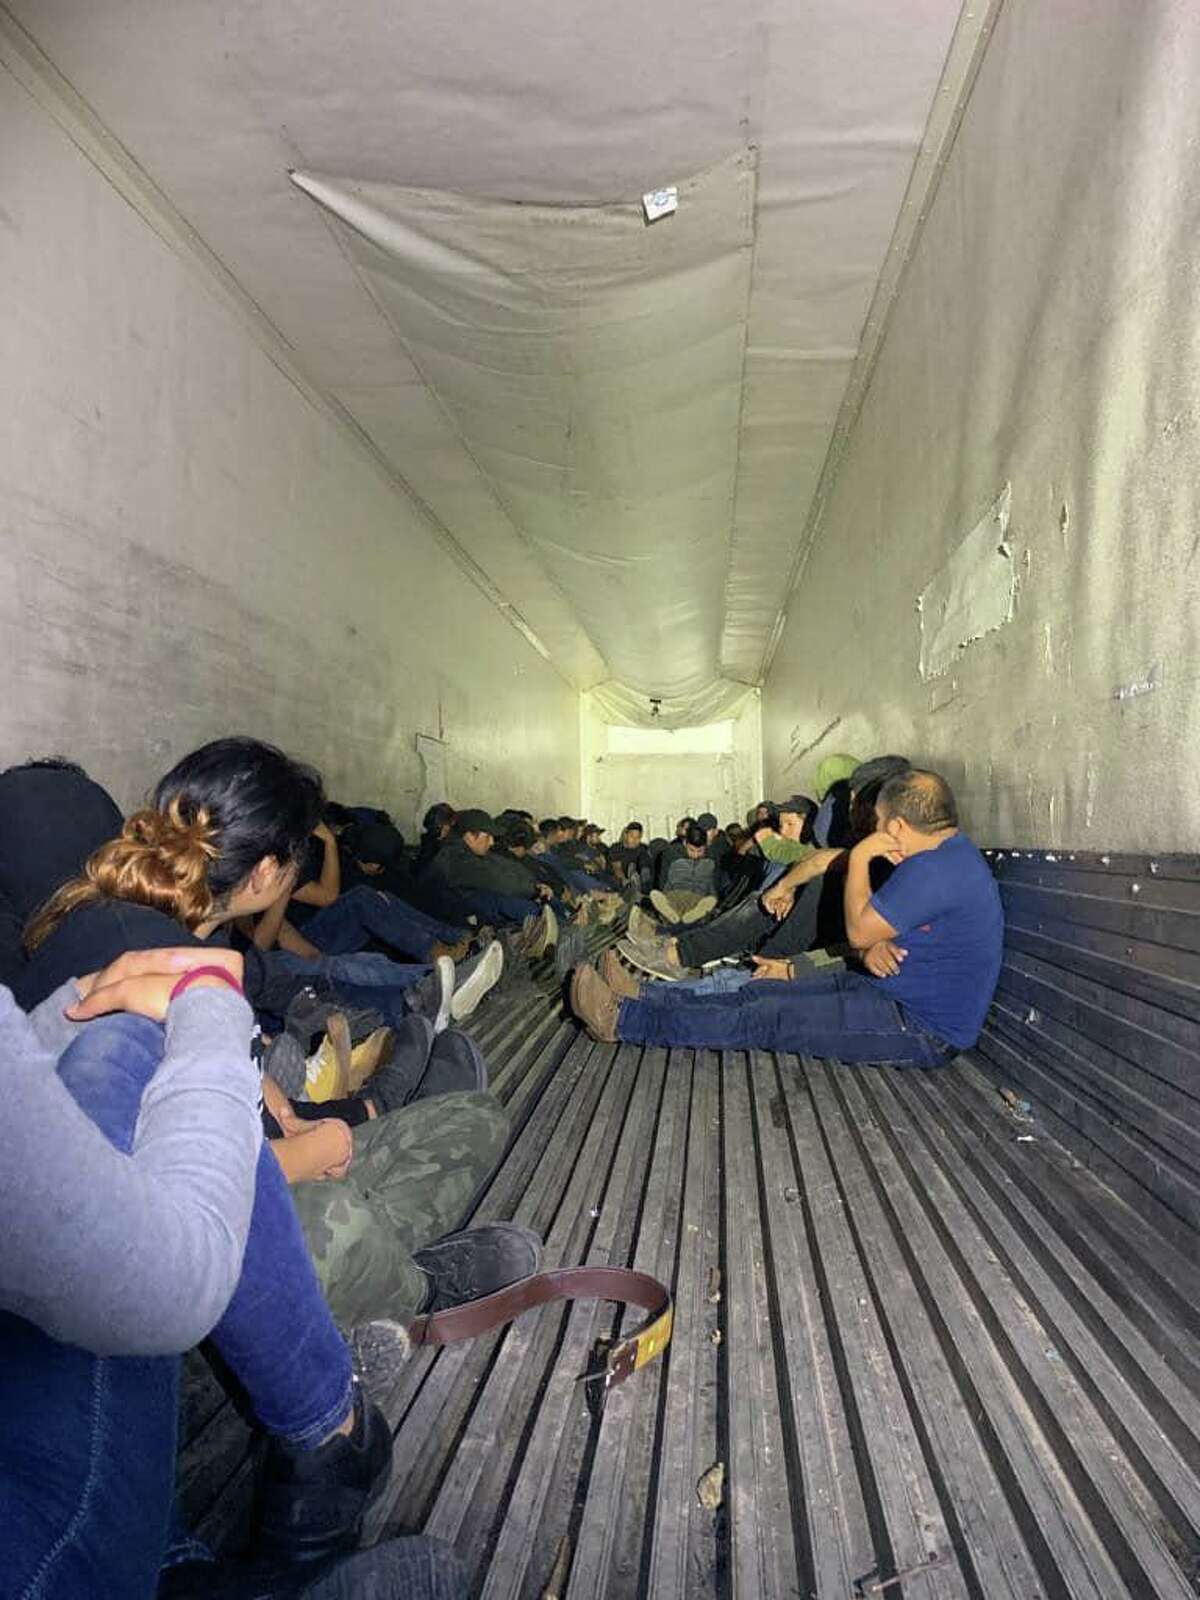 Federal and local authorities discovered 63 migrants inside a trailer.